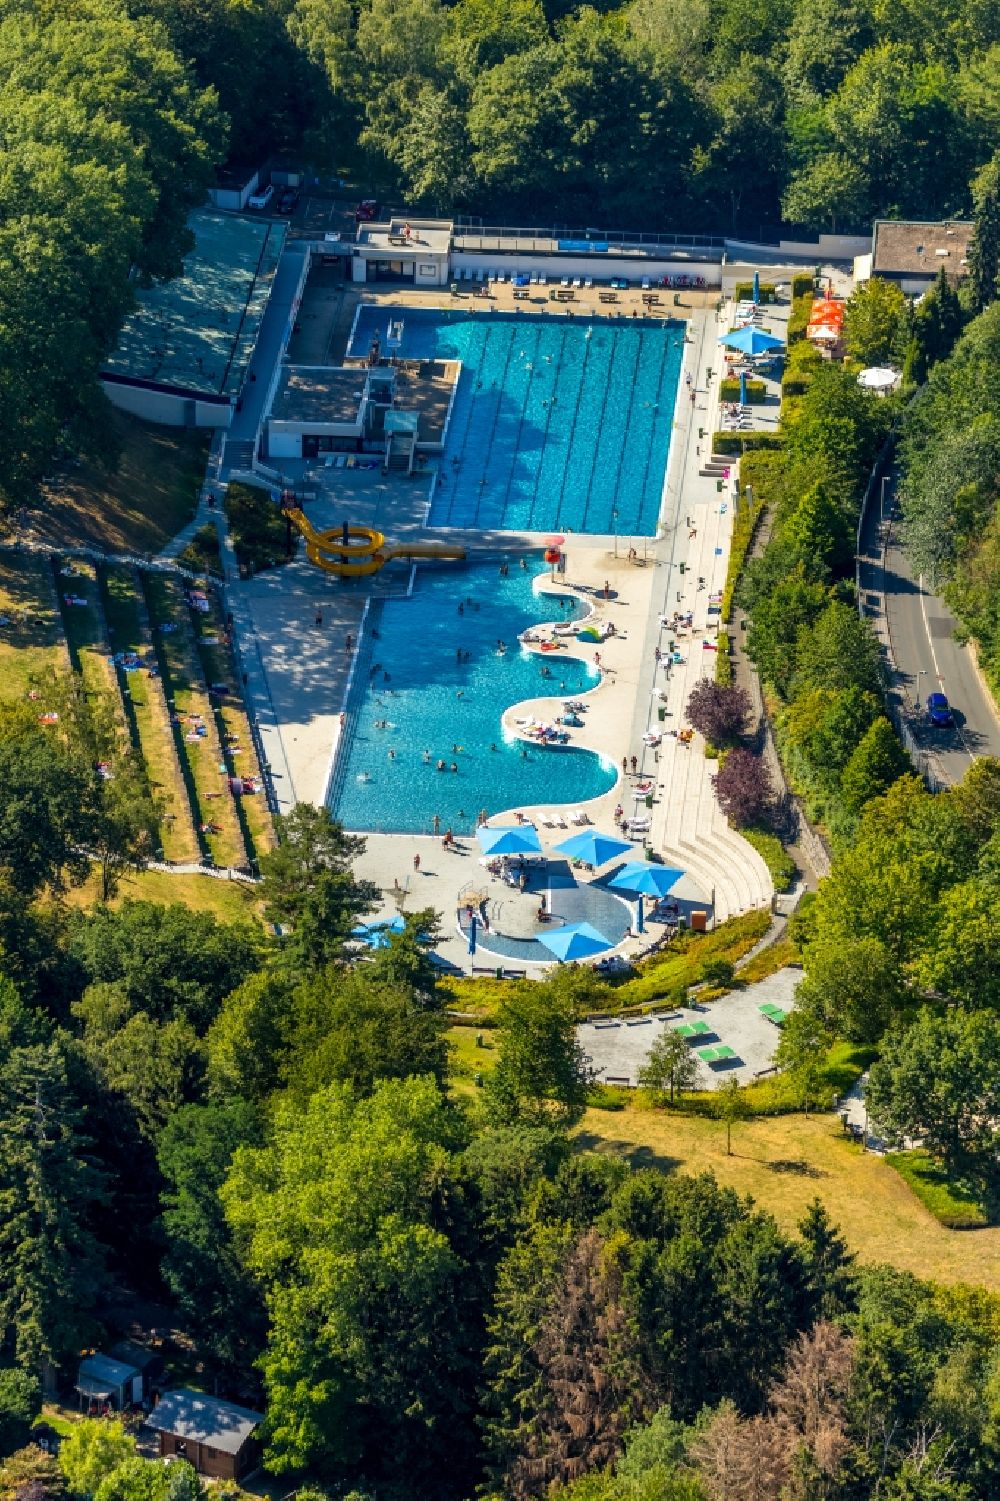 Witten from the bird's eye view: Swimming pool of the of Freibad Annen on Herdecker Street in Witten in the state North Rhine-Westphalia, Germany